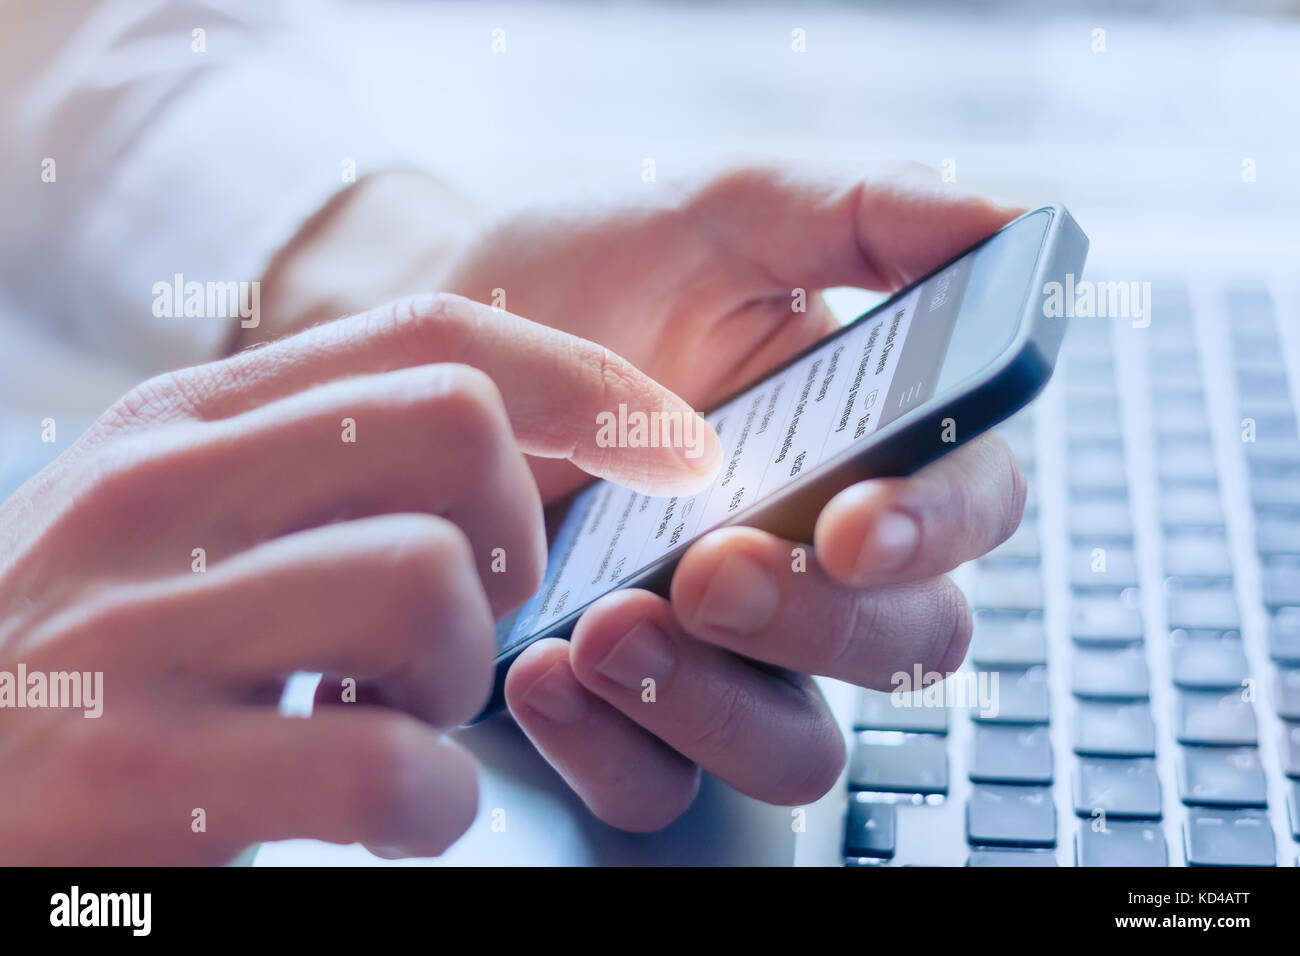 Manager sending email to contact his business team with smartphone, close-up on hand, laptop in background Stock Photo